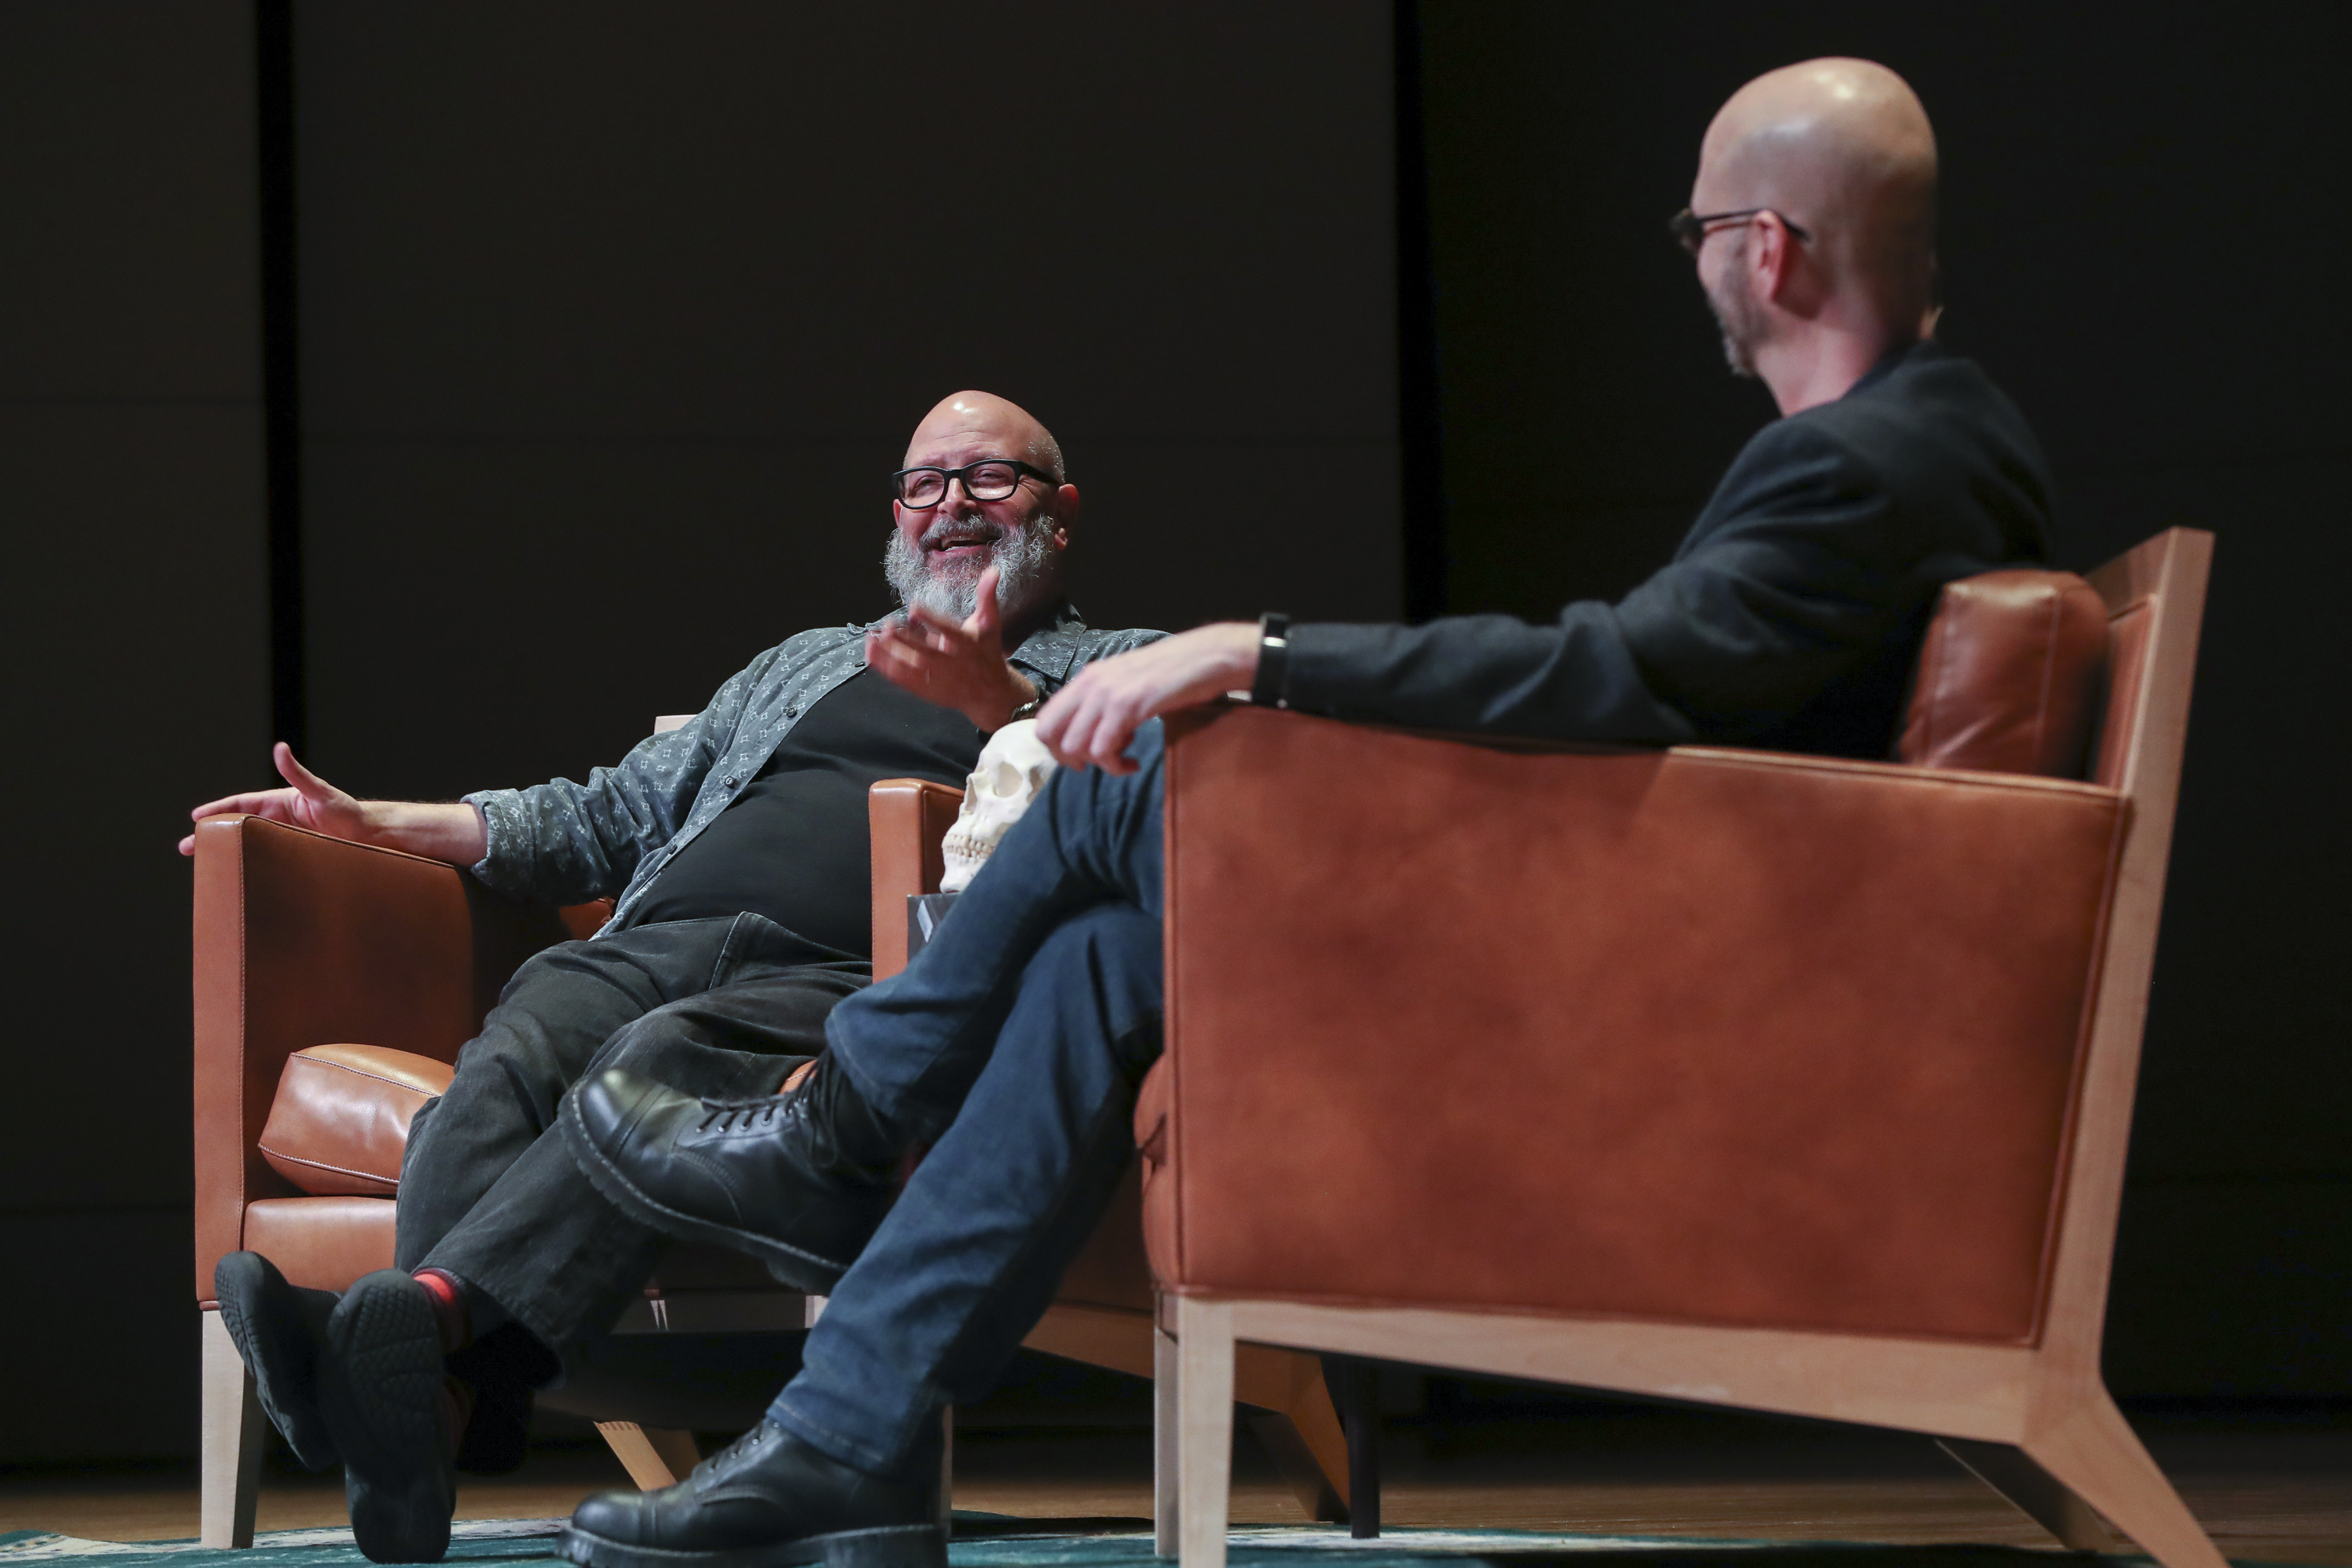 Mike Mignola and TyRuben Ellingson sitting in chairs, talking